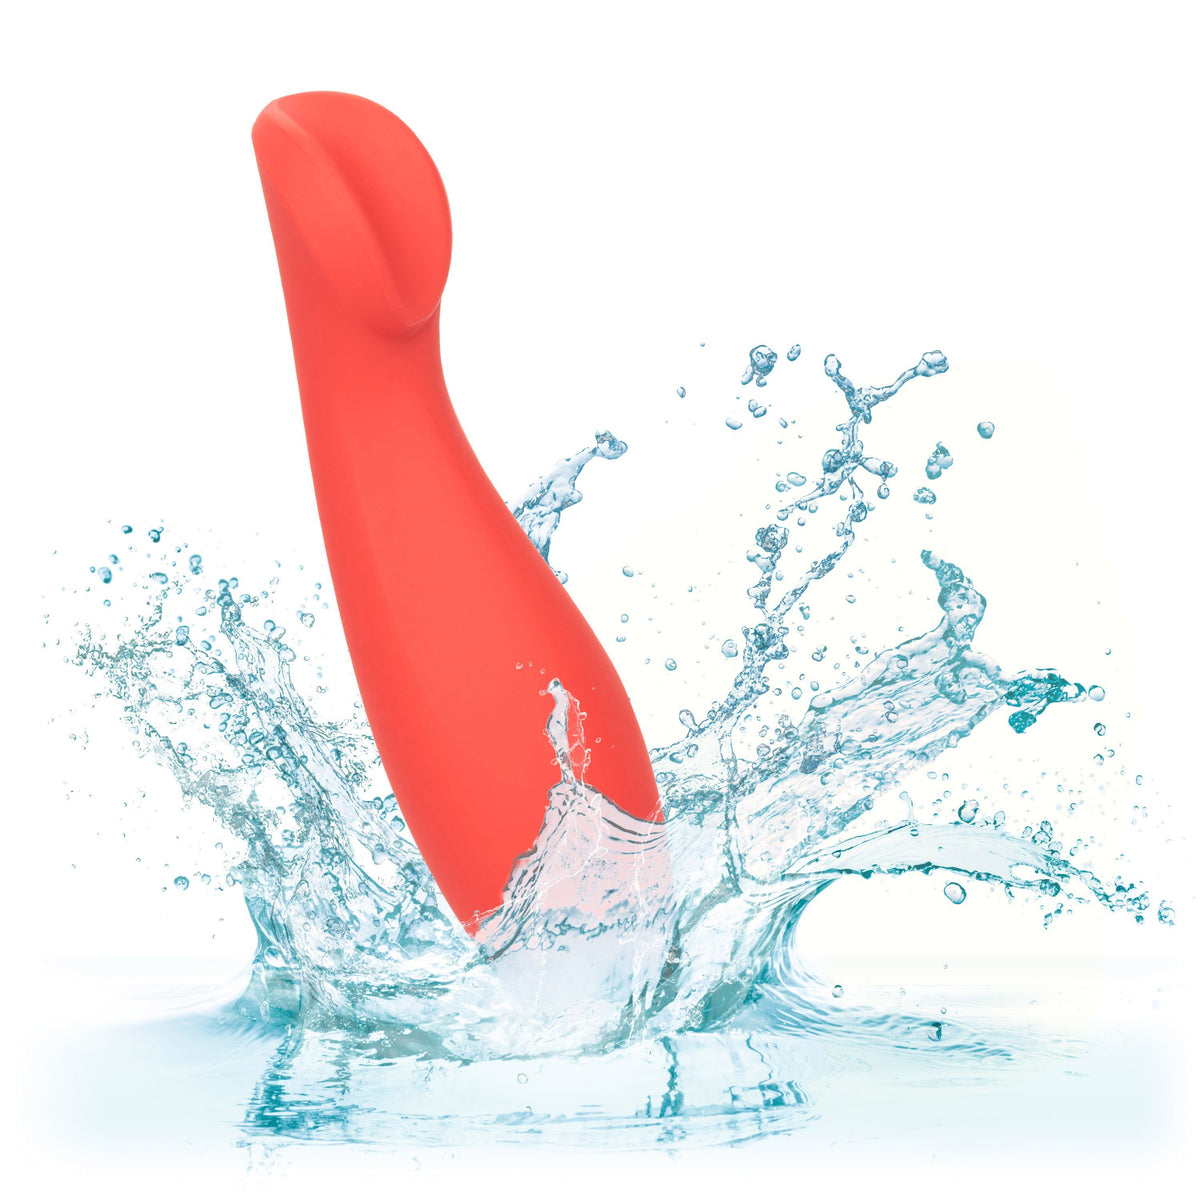 California Exotics - Red Hot Ignite Rechargeable G Spot Vibrator (Red) CE1626 CherryAffairs